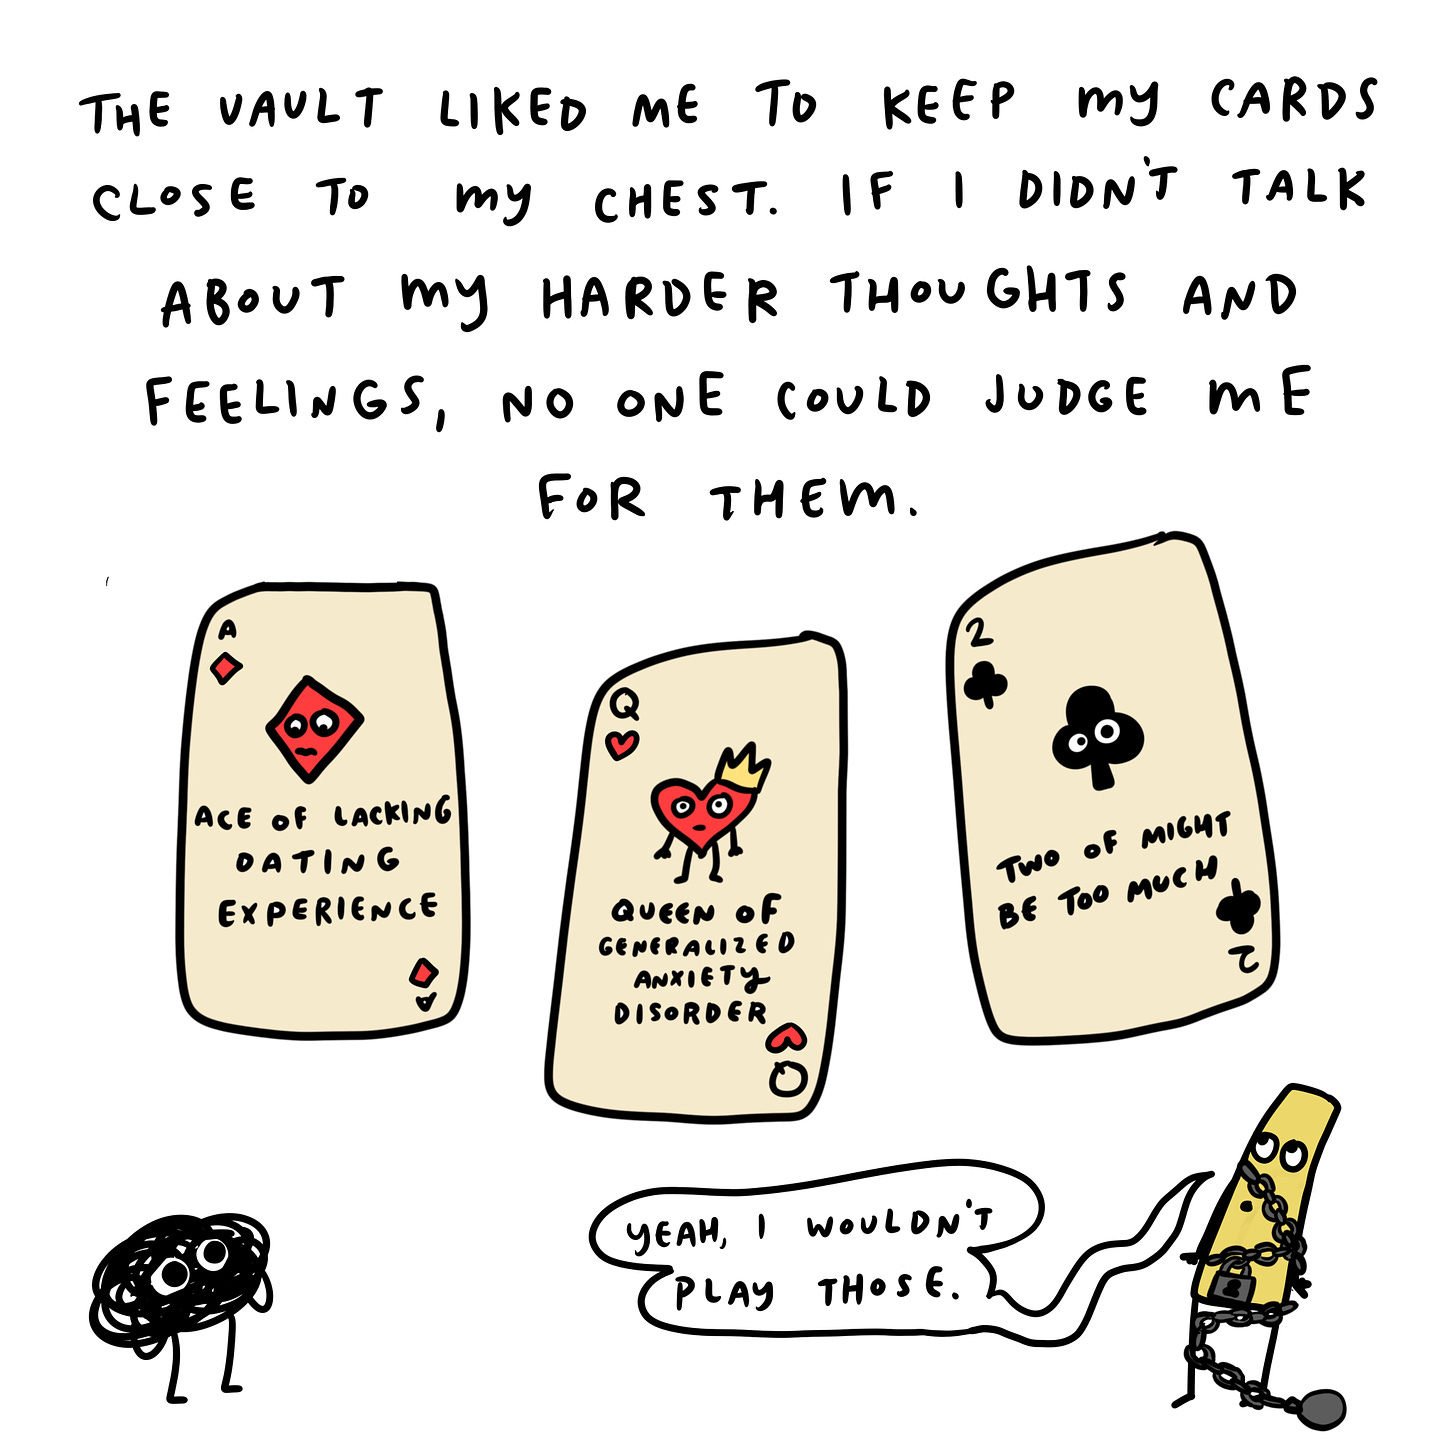  The Vault believed in keeping our cards close to the chest. If I didn’t talk about my inner thoughts and hard feelings, then no one could judge me for them.   Anxiety: Your dating experience is laughable!  The Vault: That’s why we’re not elaborating on that.